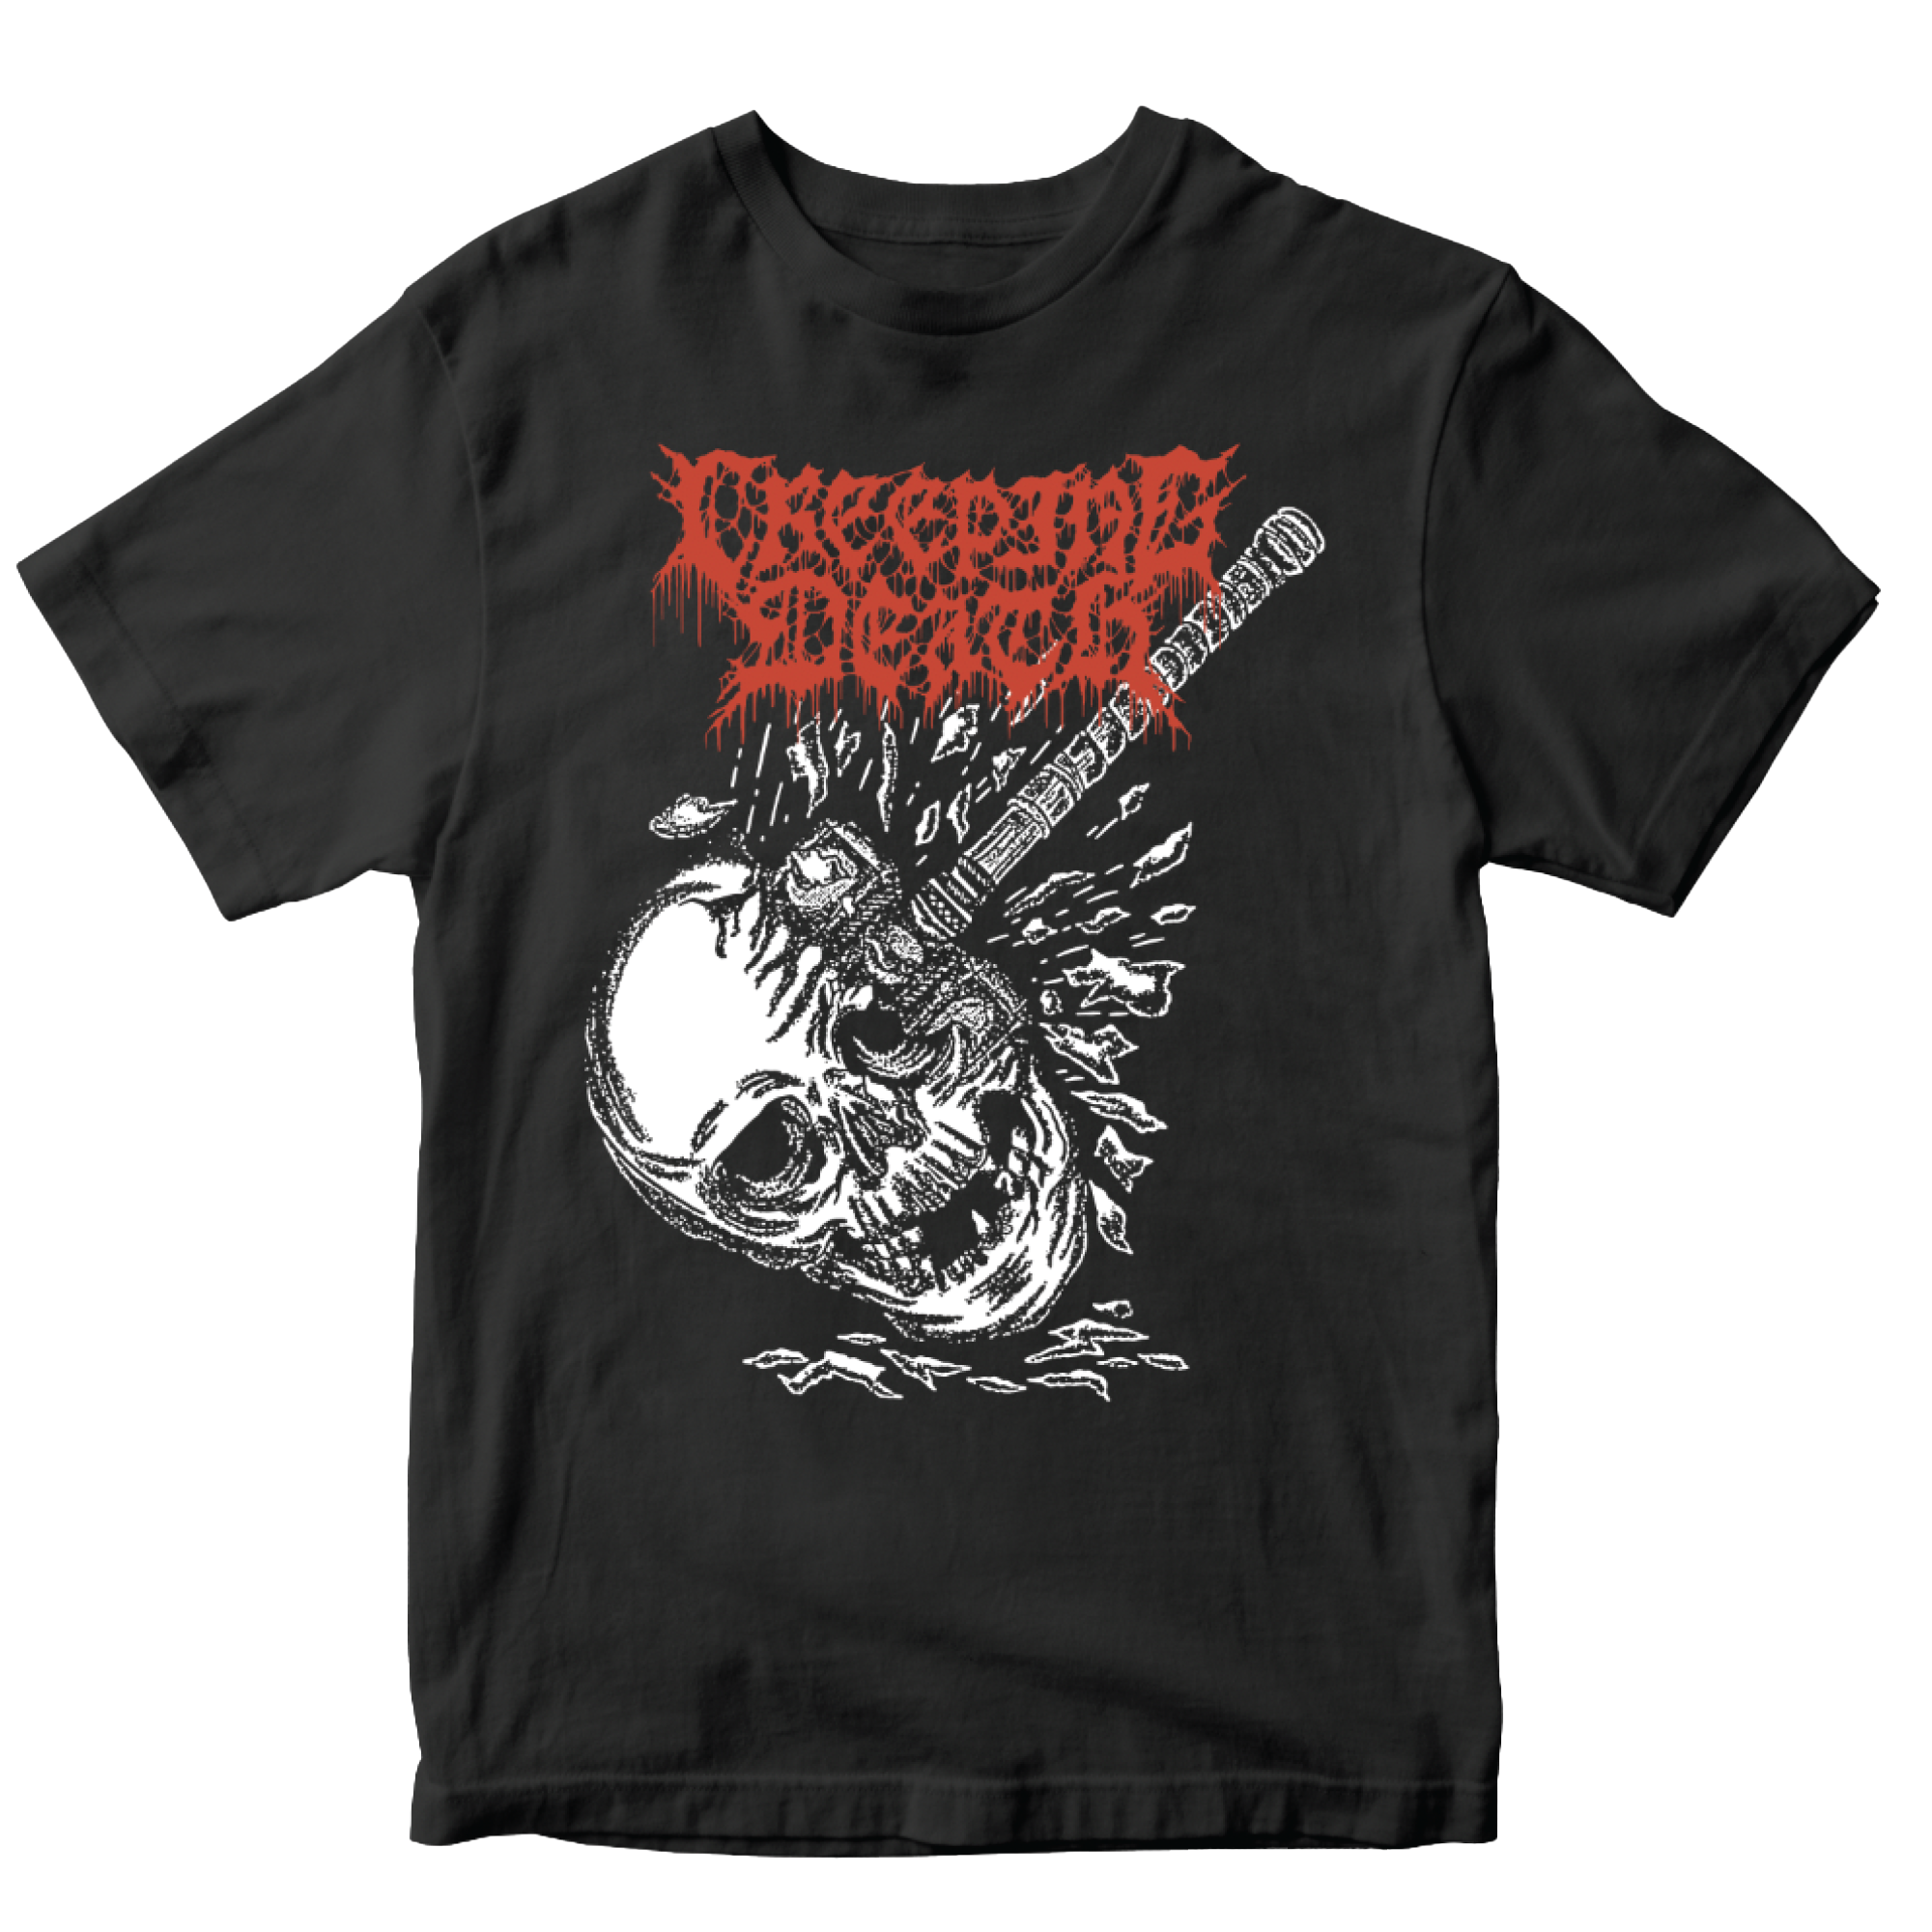 Creeping Death - Mallet Smashed Head T-Shirt